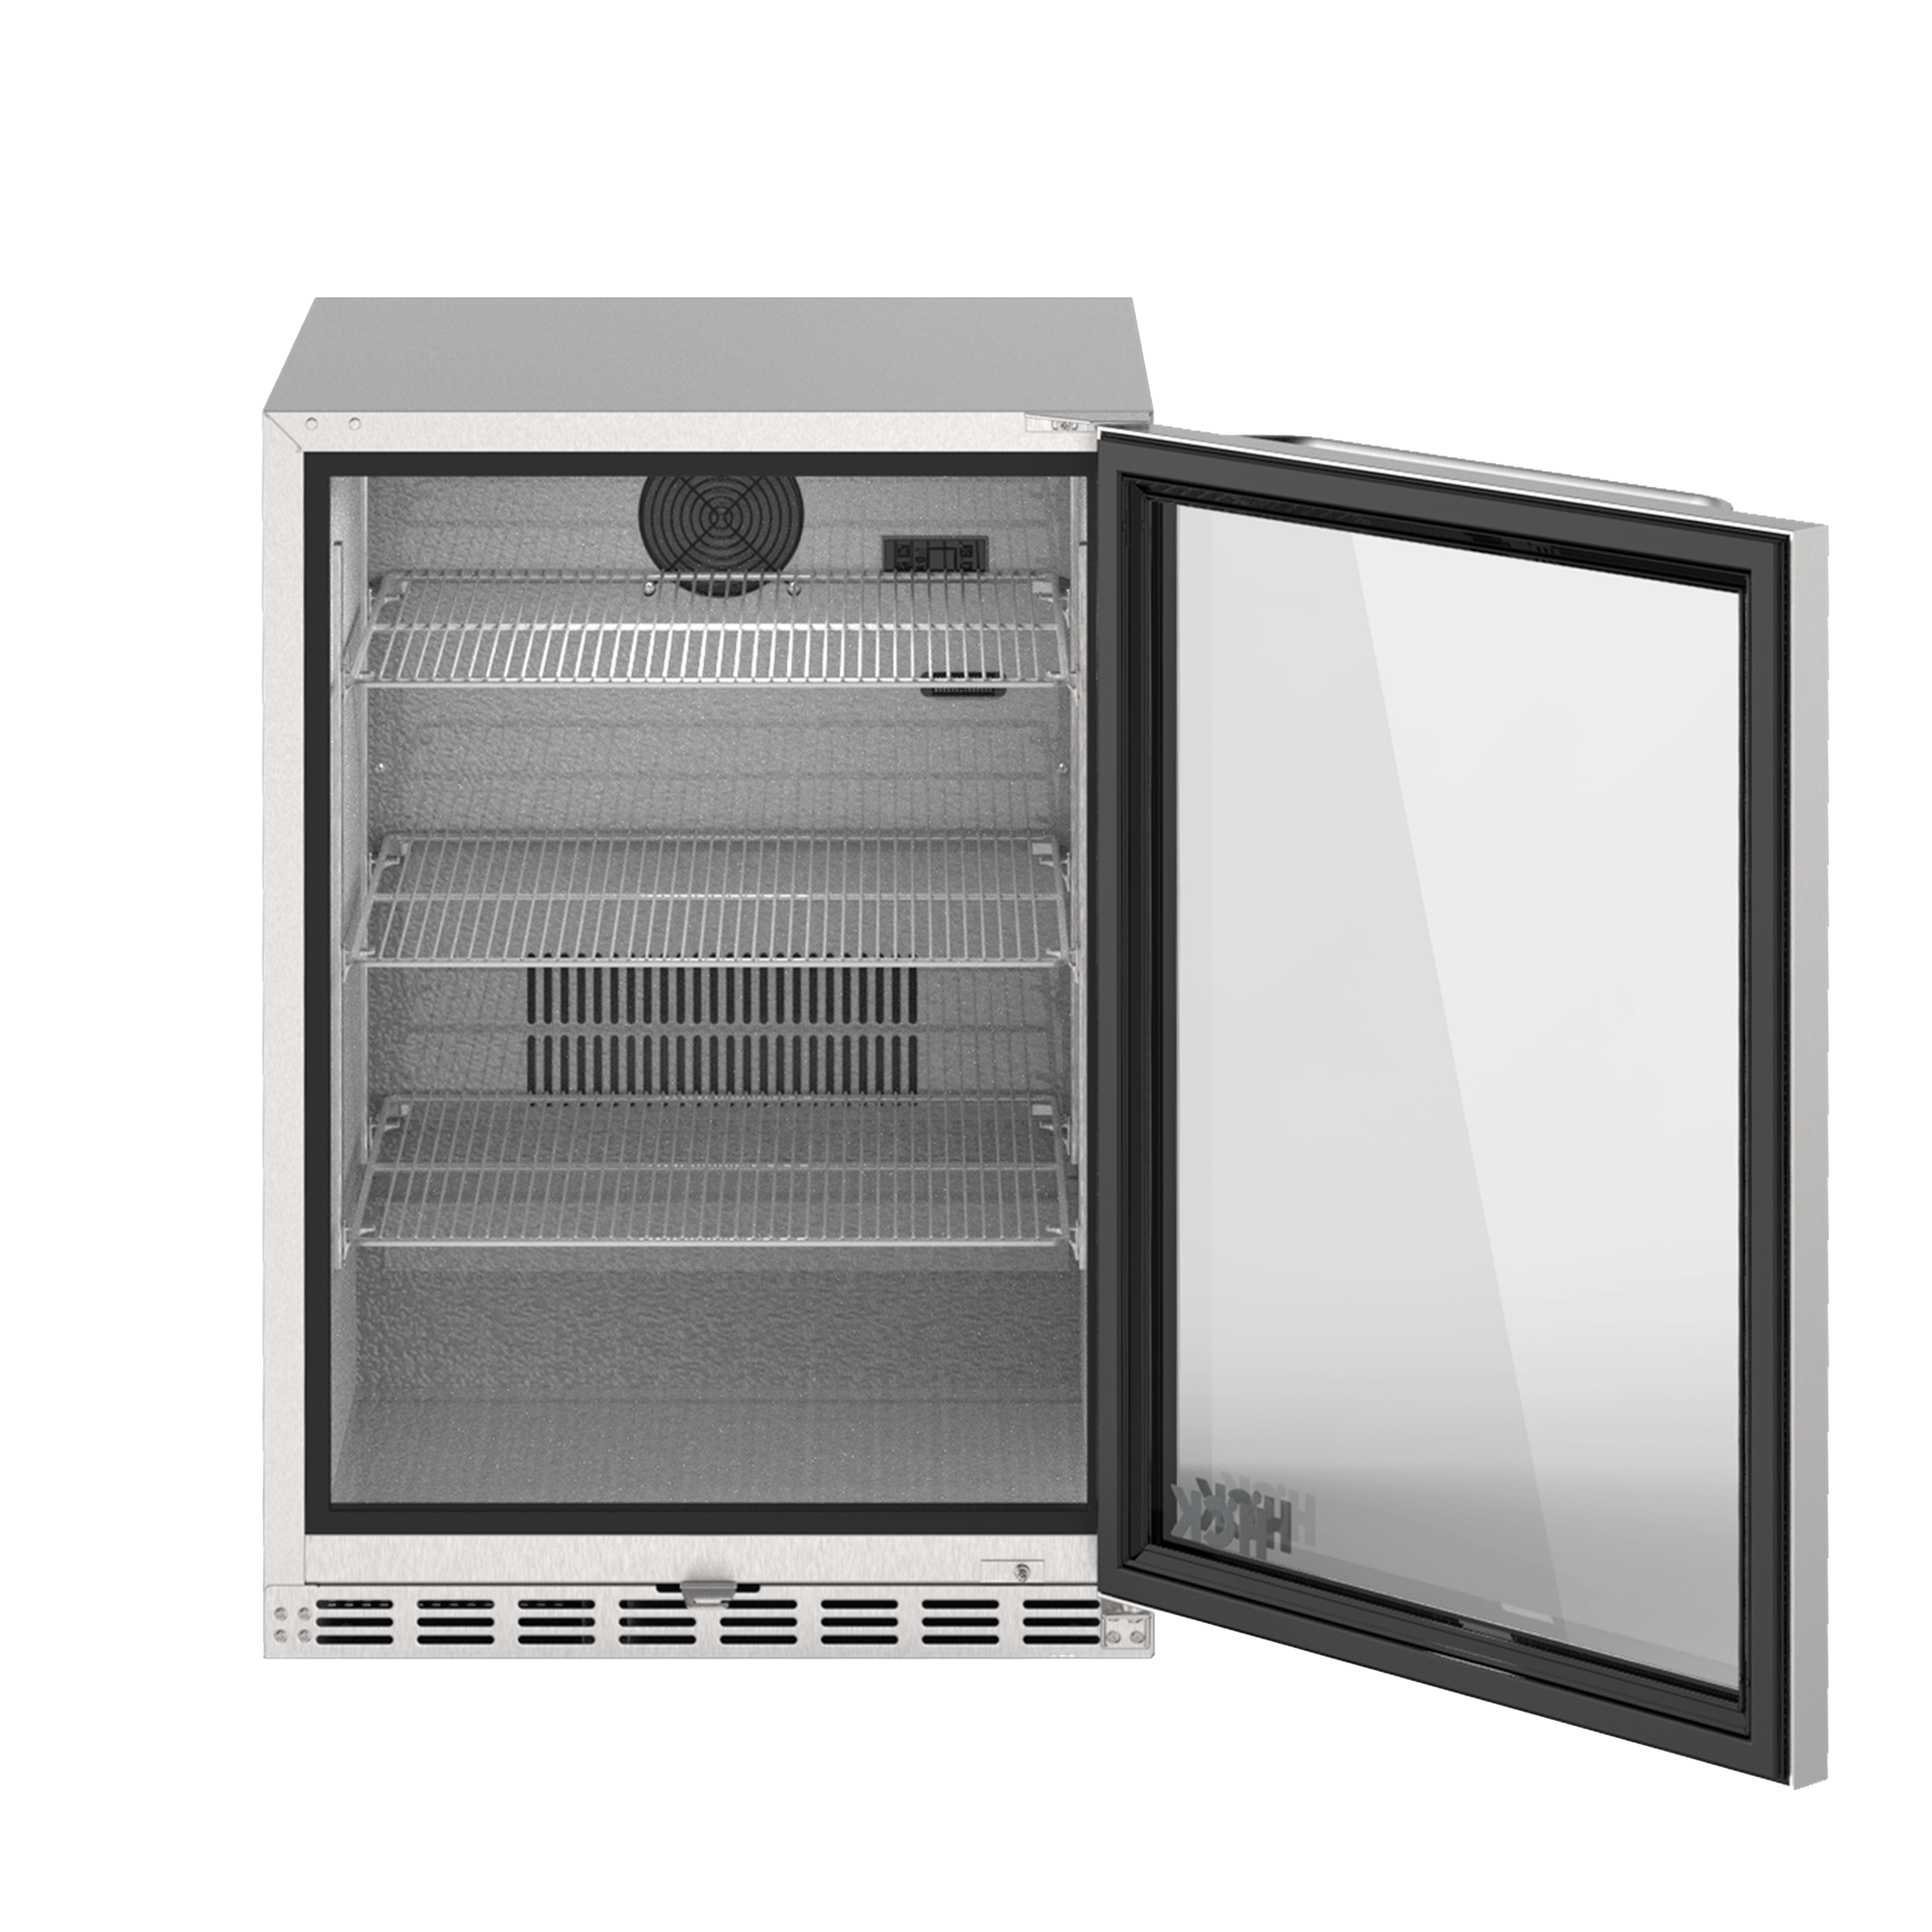 Front view of a 5.12 Cu Ft Beverage Outdoor Refrigerator with the door open, revealing the interior space equipped with three wire shelves